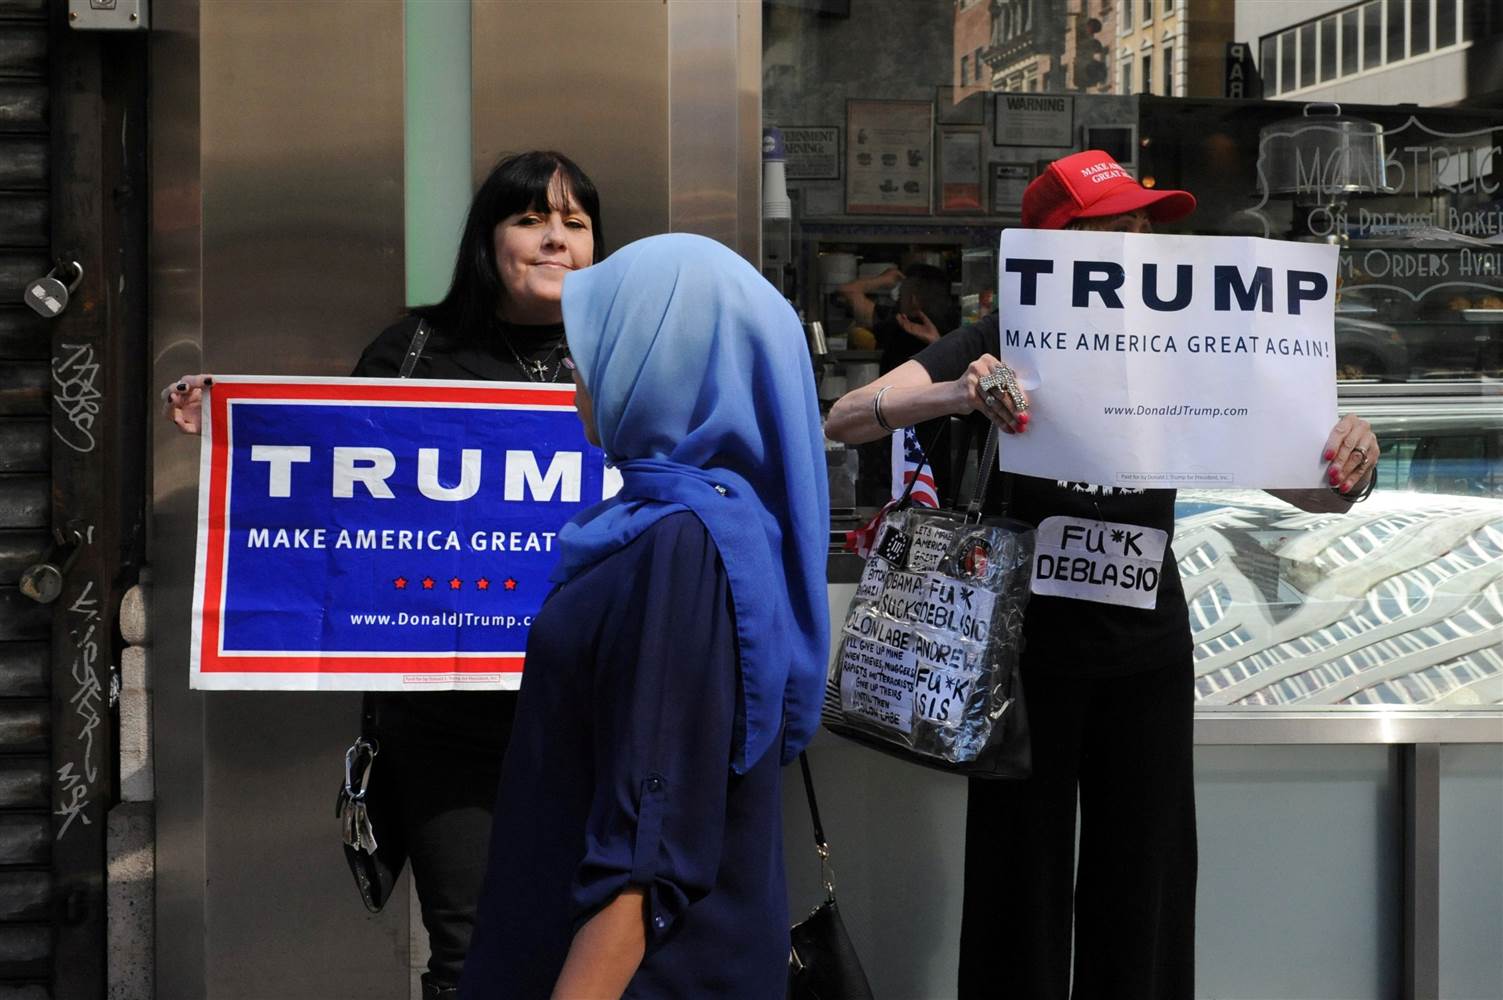 A woman wearing a Muslim headscarf walks past people holding Donald Trump signs before the annual Muslim Day Parade in the Manhattan on Sept. 25. Stephanie Keith / Reuters
